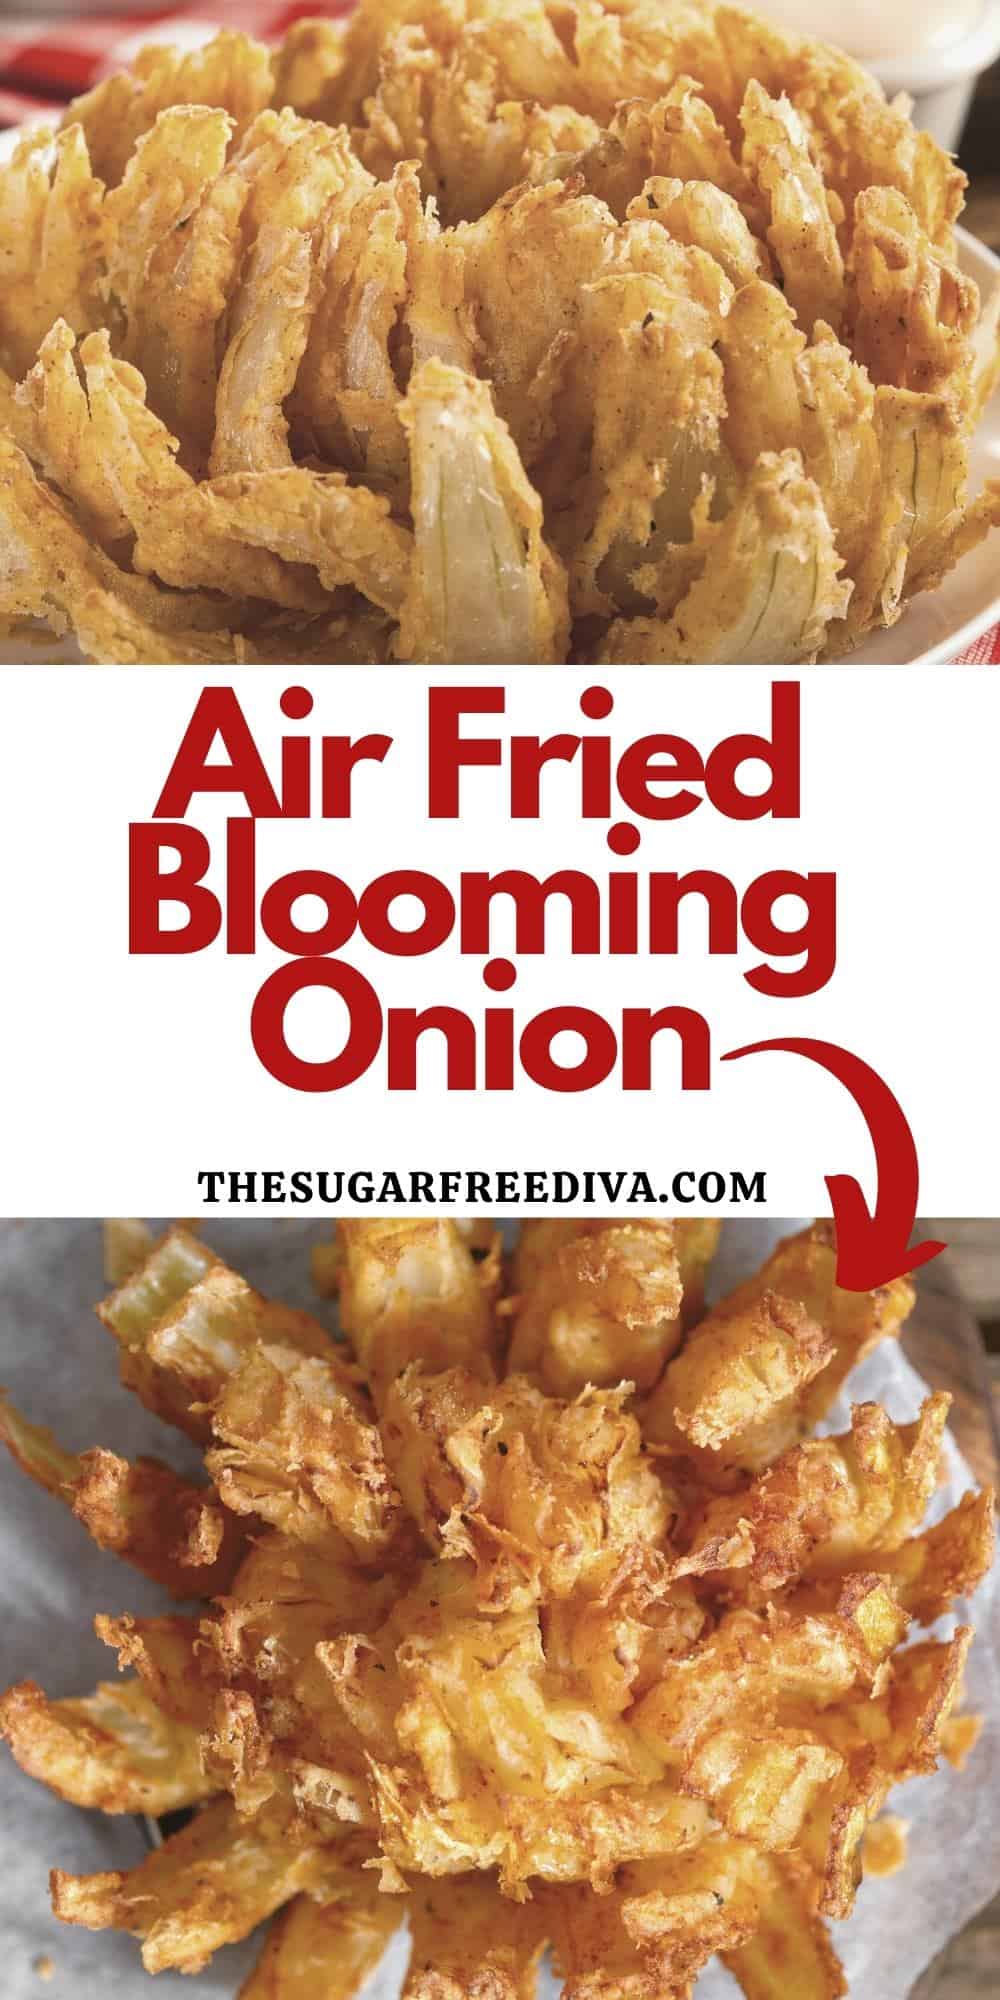 This is how to make an Air Fried Blooming Onion that tastes and looks just like the blooming onion that is fried and full of calories.